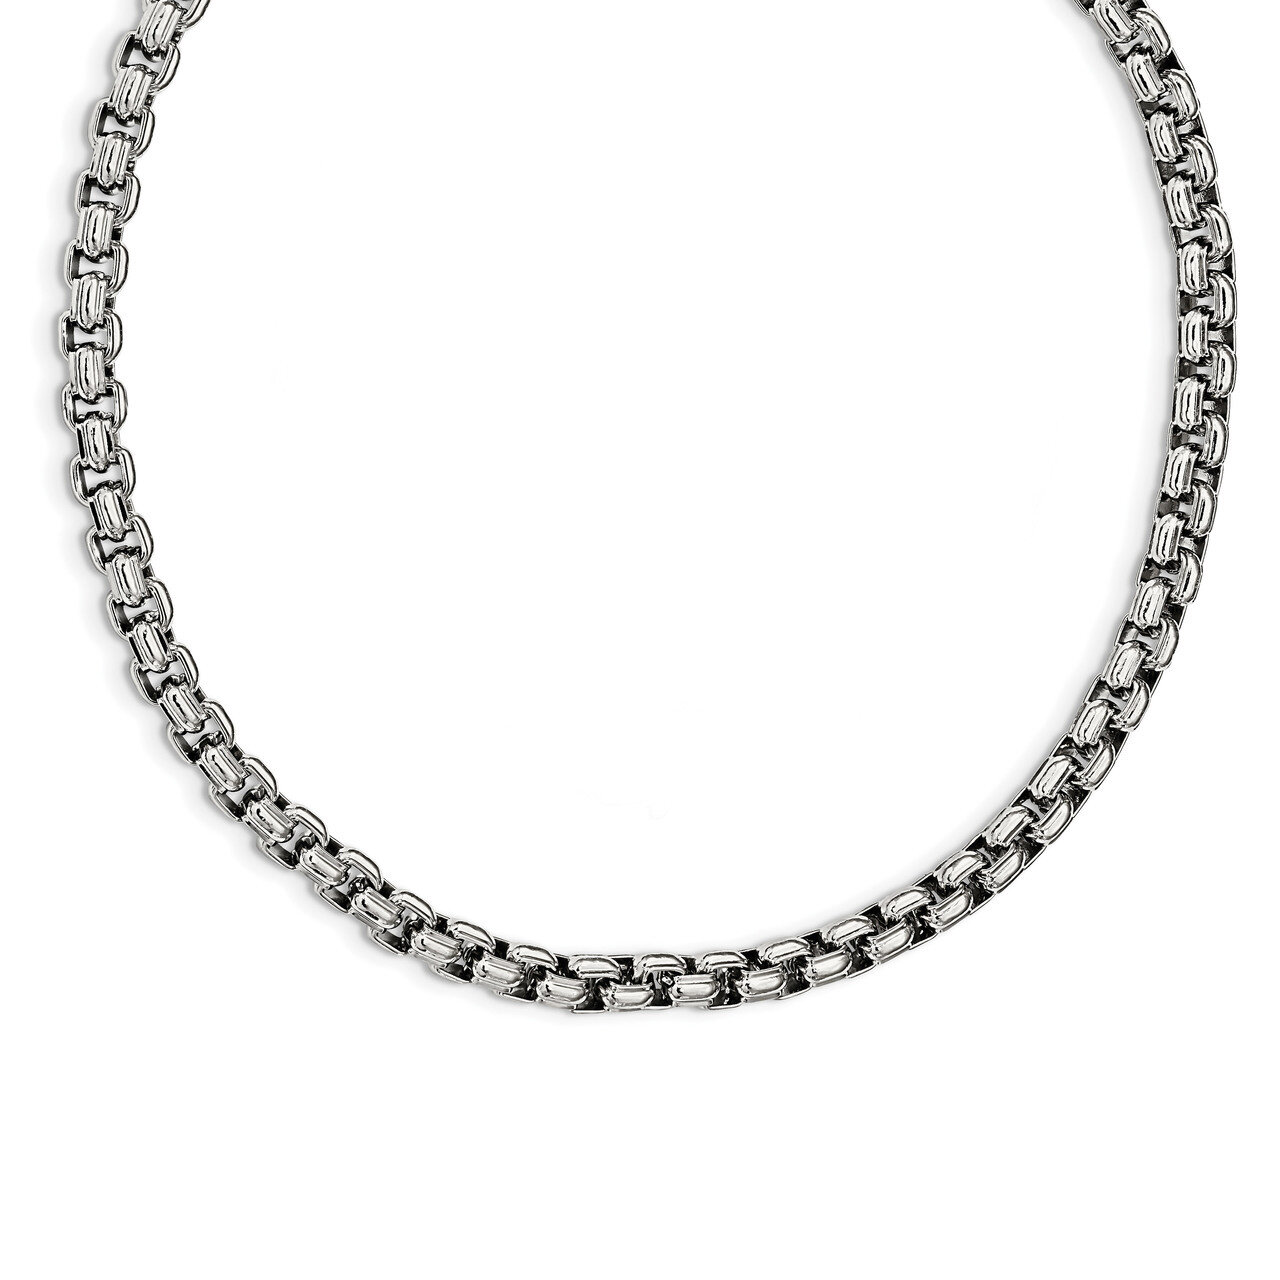 Fancy Box 24 Inch Necklace Stainless Steel Polished SRN2318-24